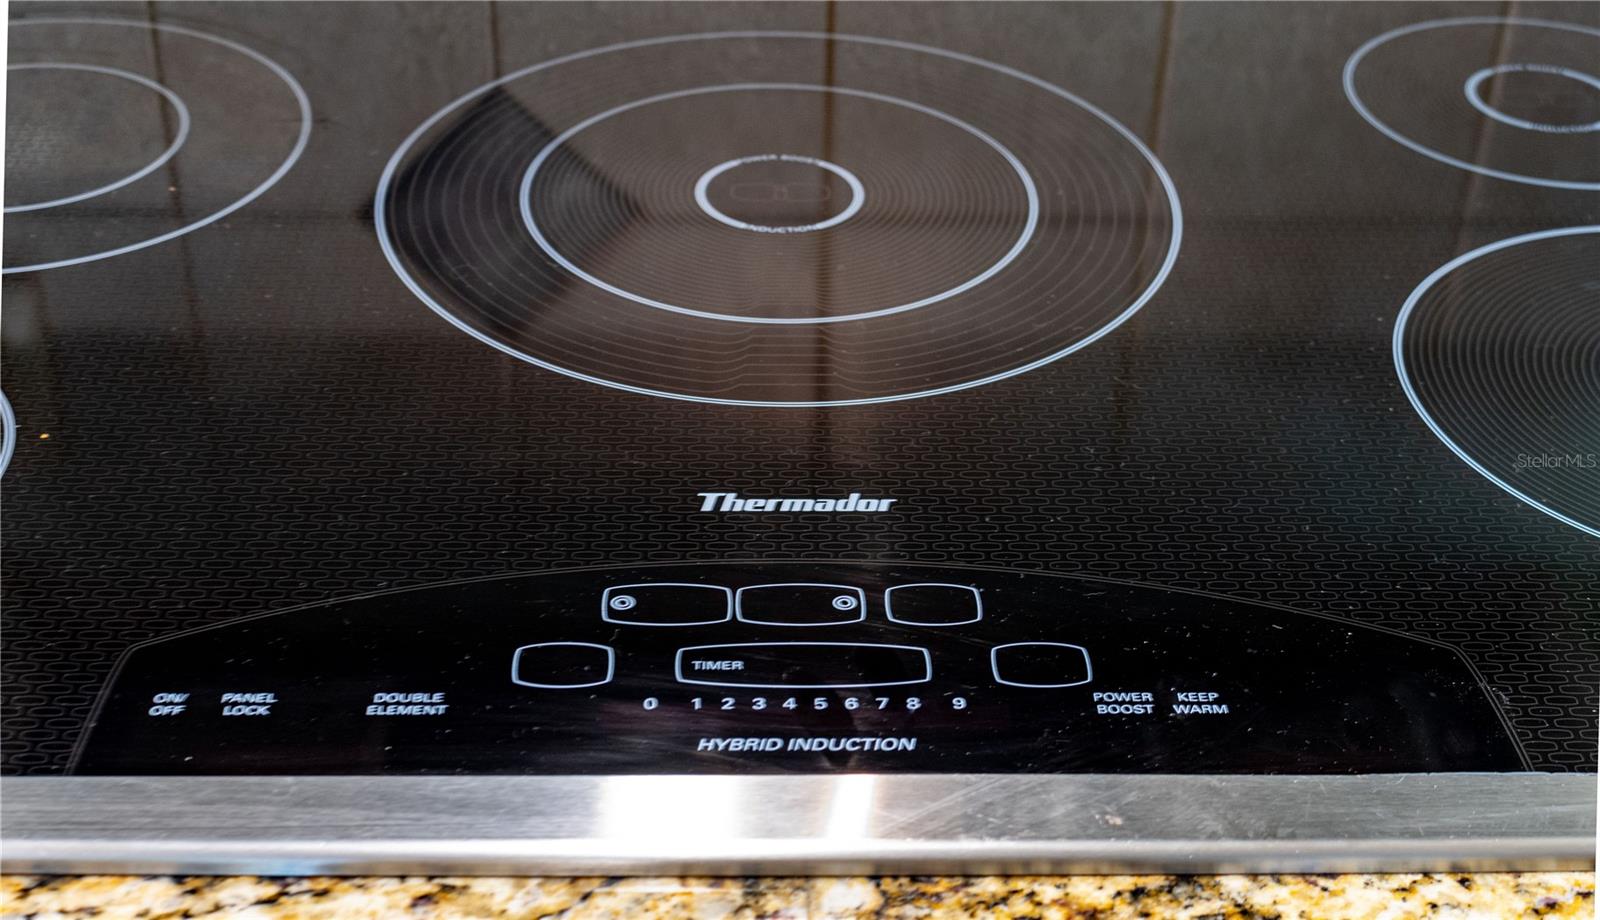 Thermador Induction stove top